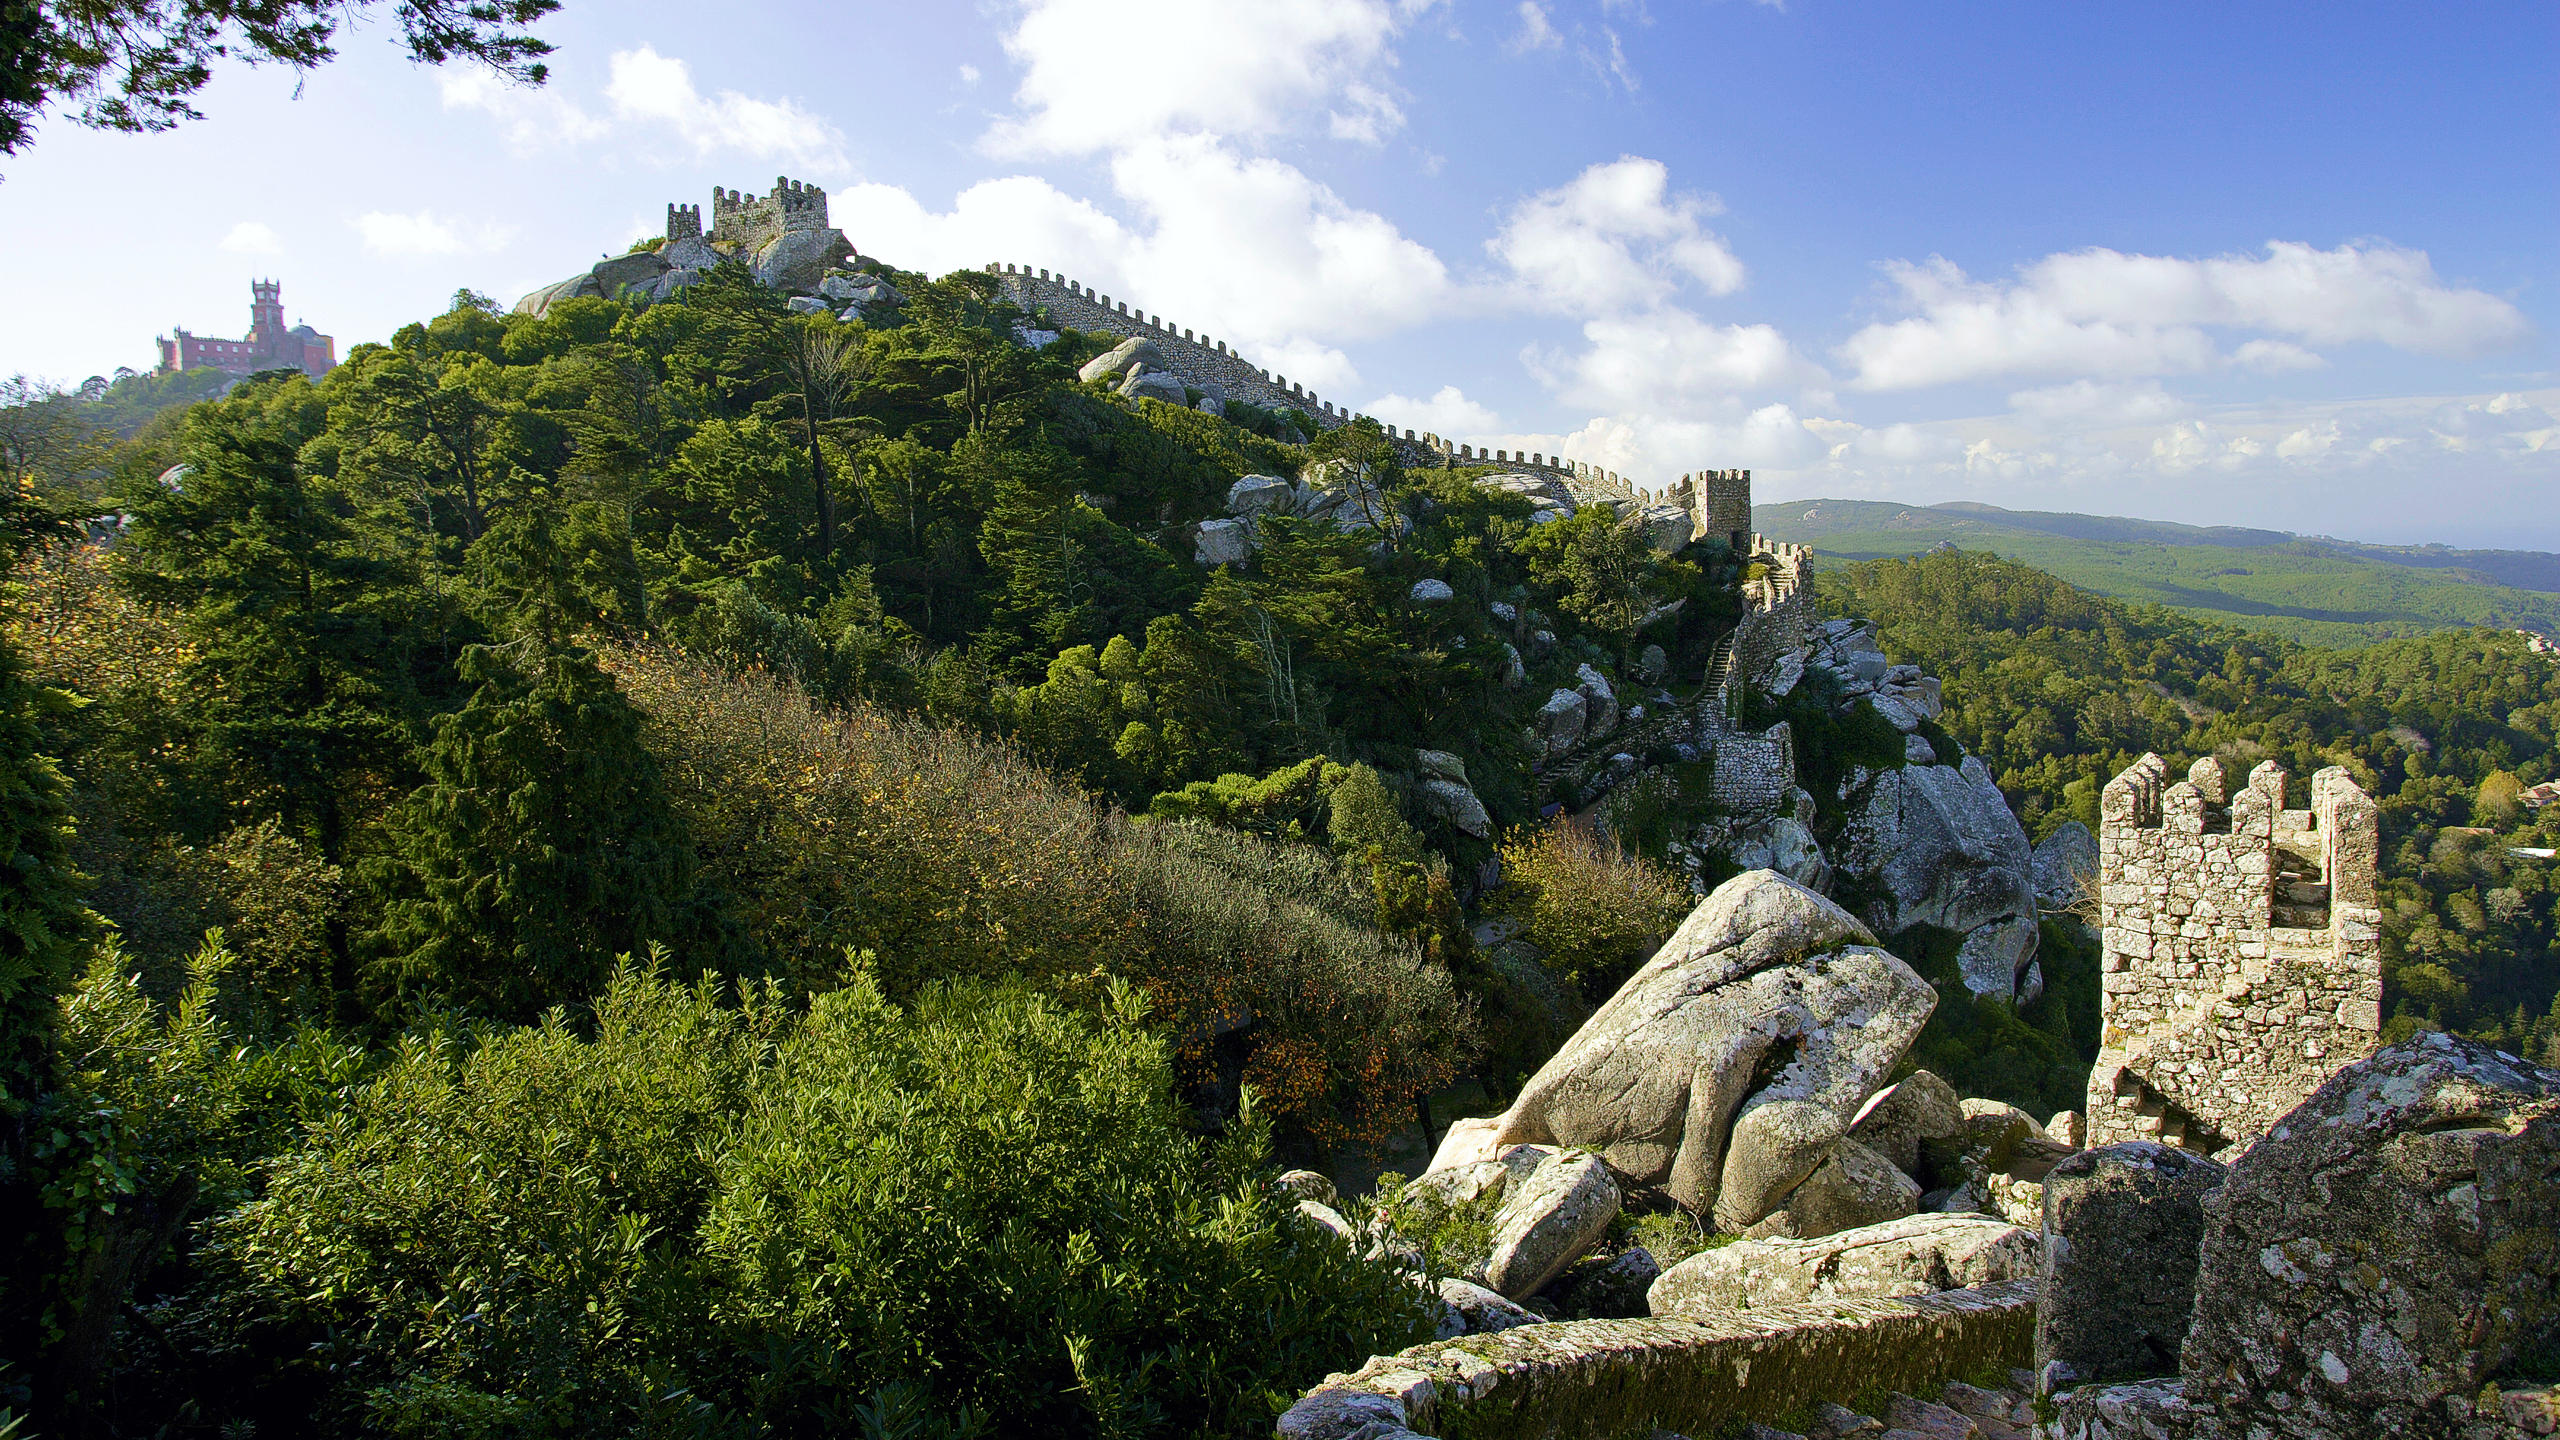 Walls of the Castle of the Moors with the Pena Palace in the background on the left